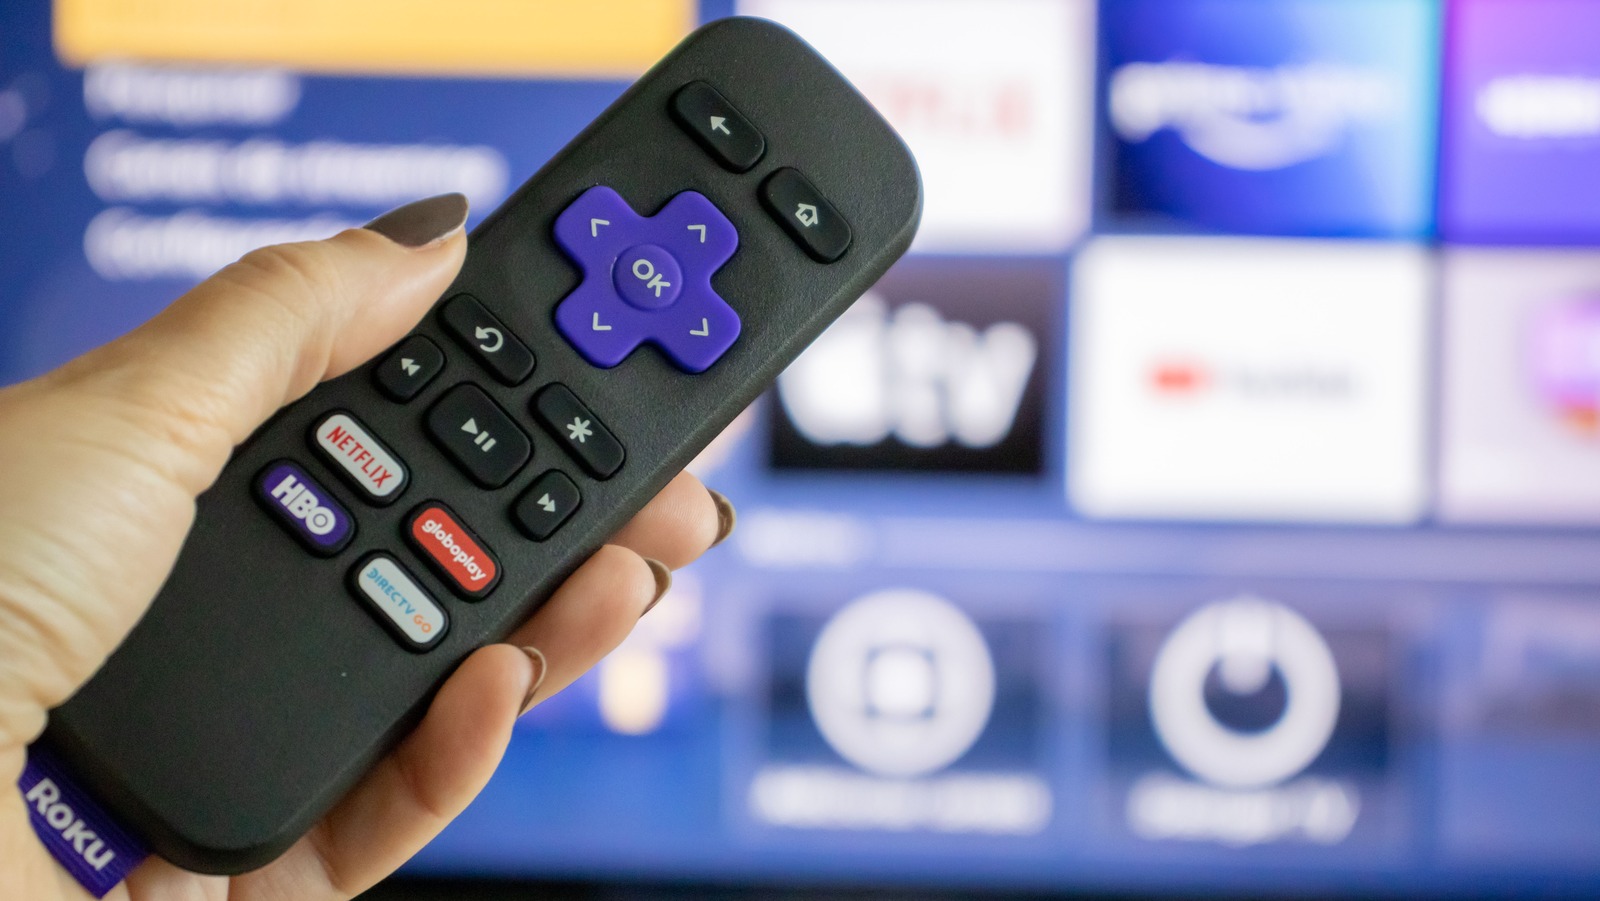 Free Channels Every Roku Streaming Stick User Should Have Installed